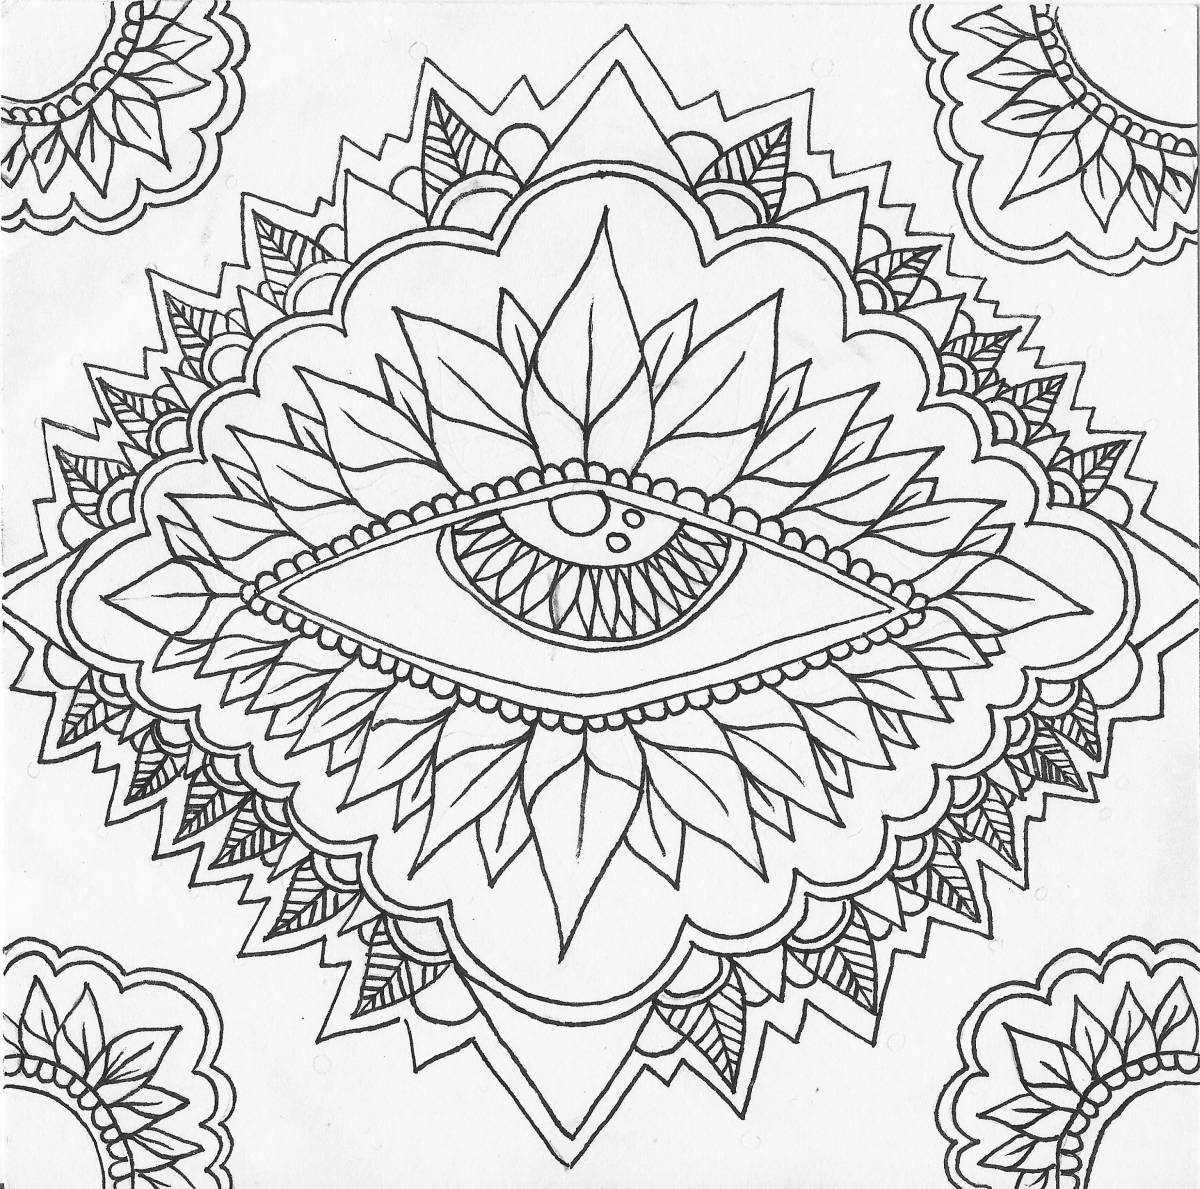 Calming mantra coloring pages